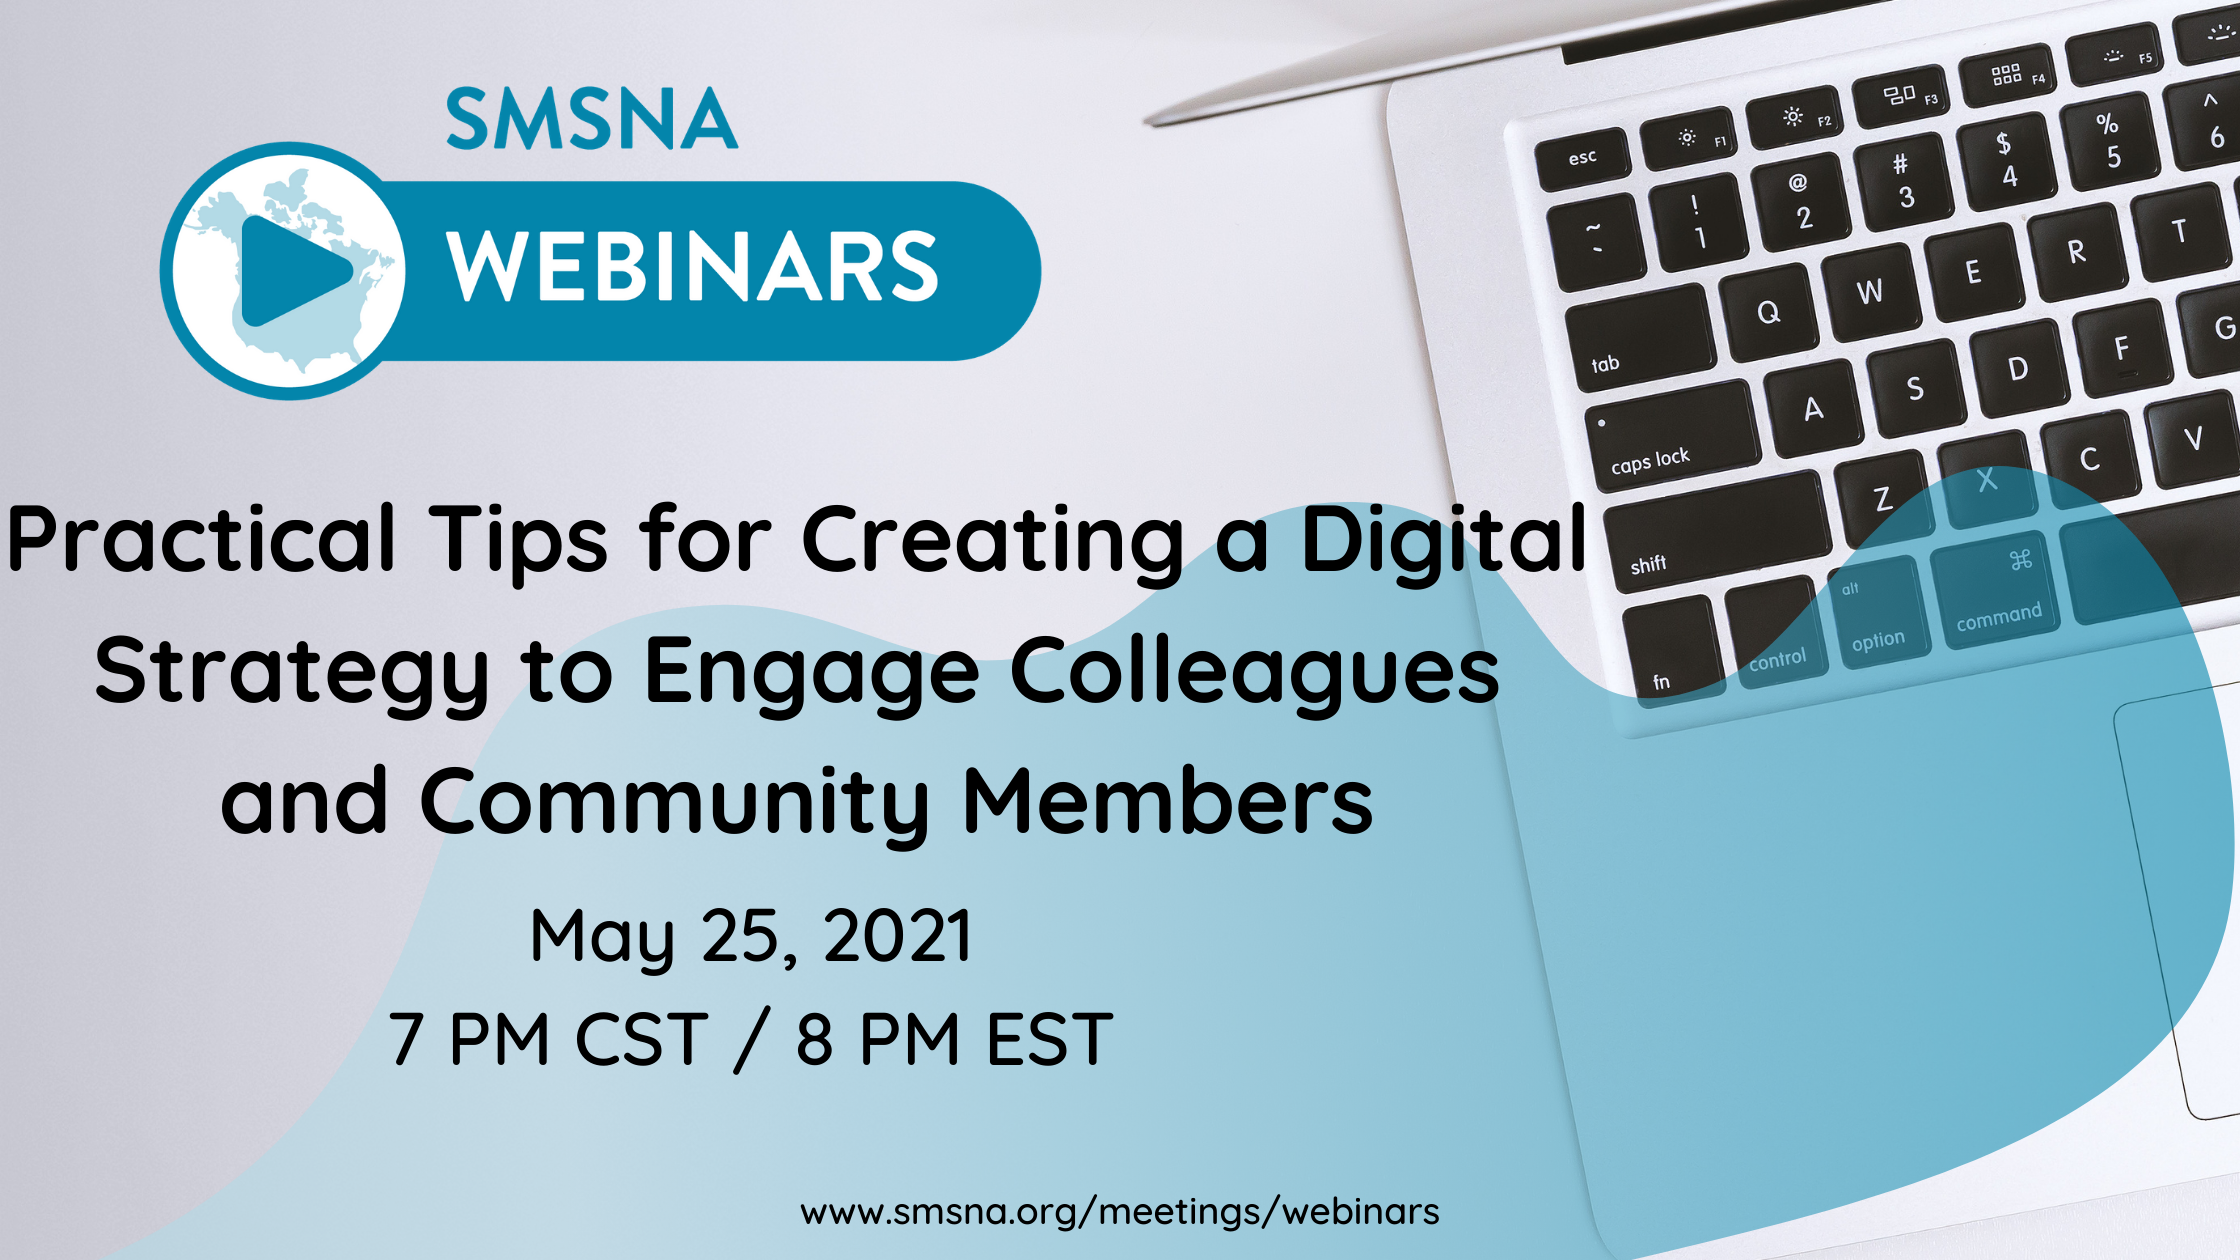 Practical Tips for Creating a Digital Strategy to Engage Colleagues and Community Members